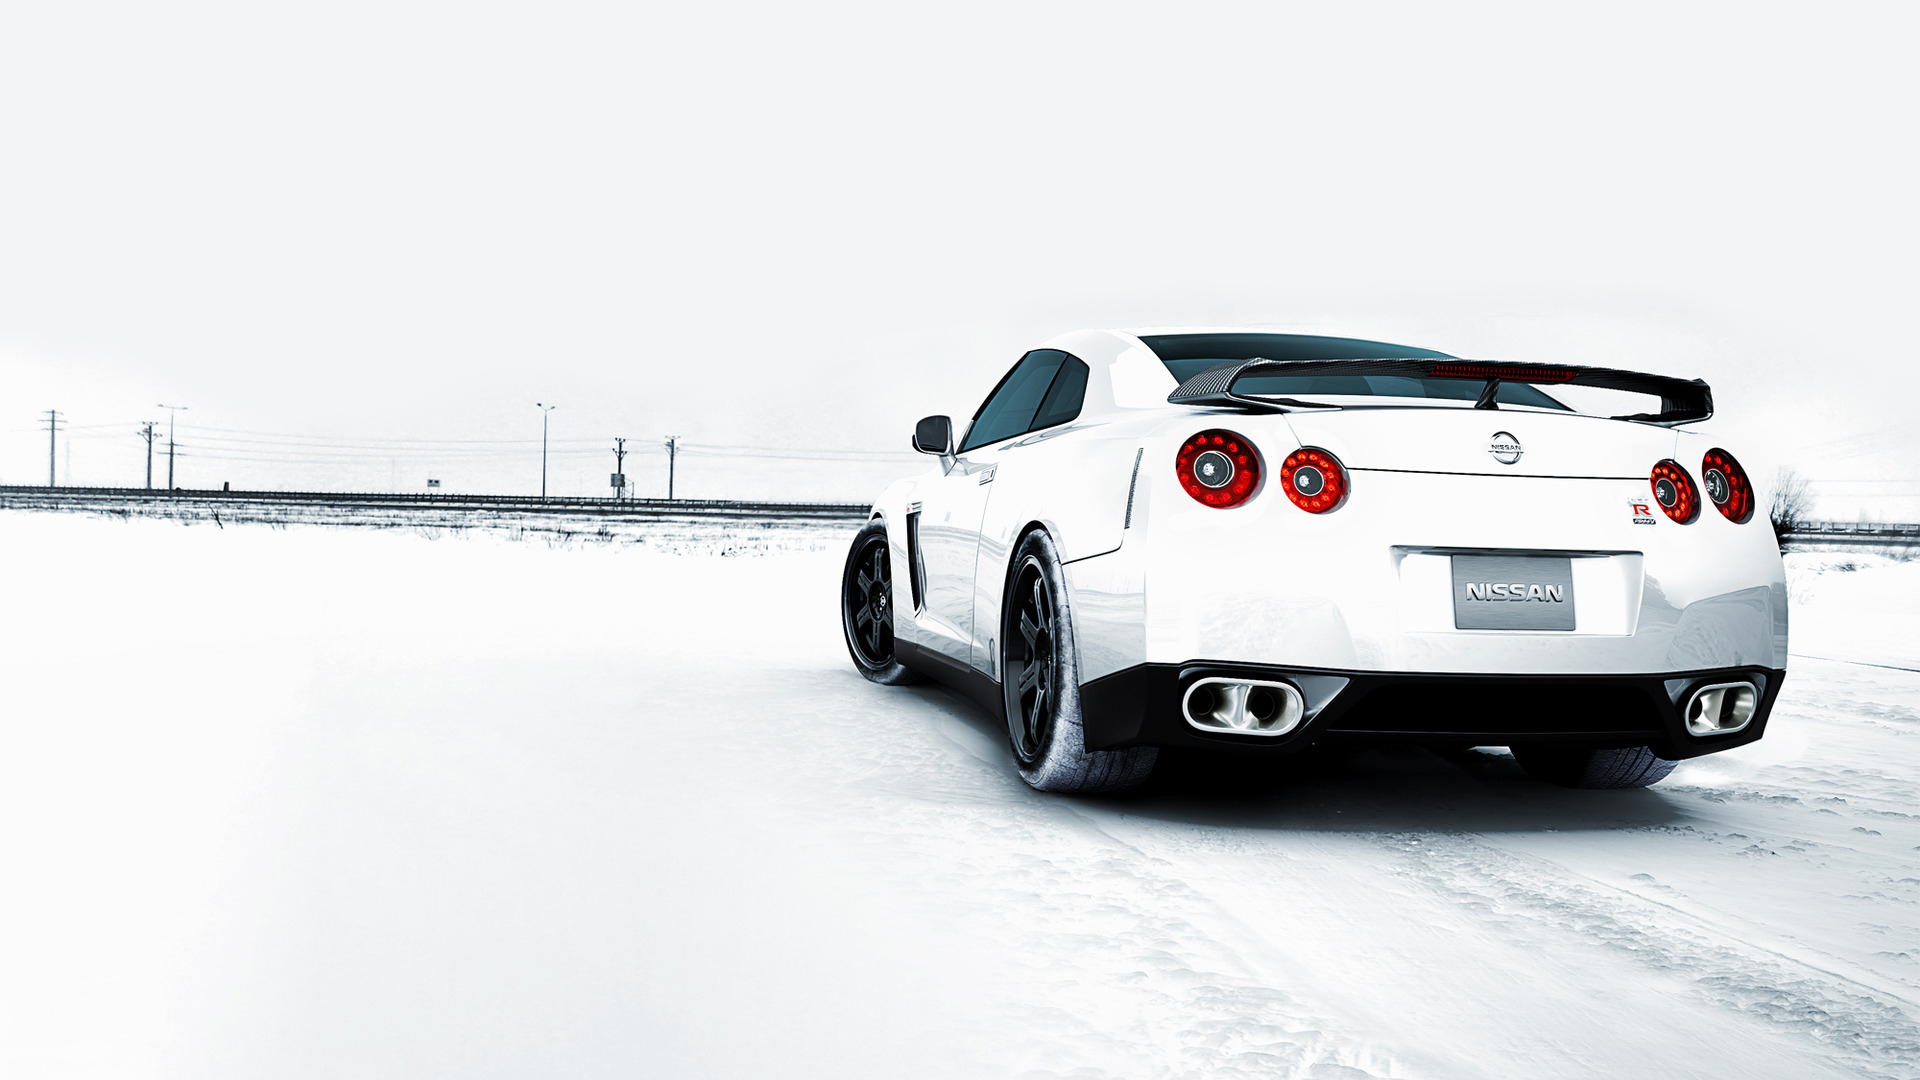 General 1920x1080 car Japanese cars Nissan GT-R Nissan white cars supercars vehicle snow winter taillights licence plates rear view white